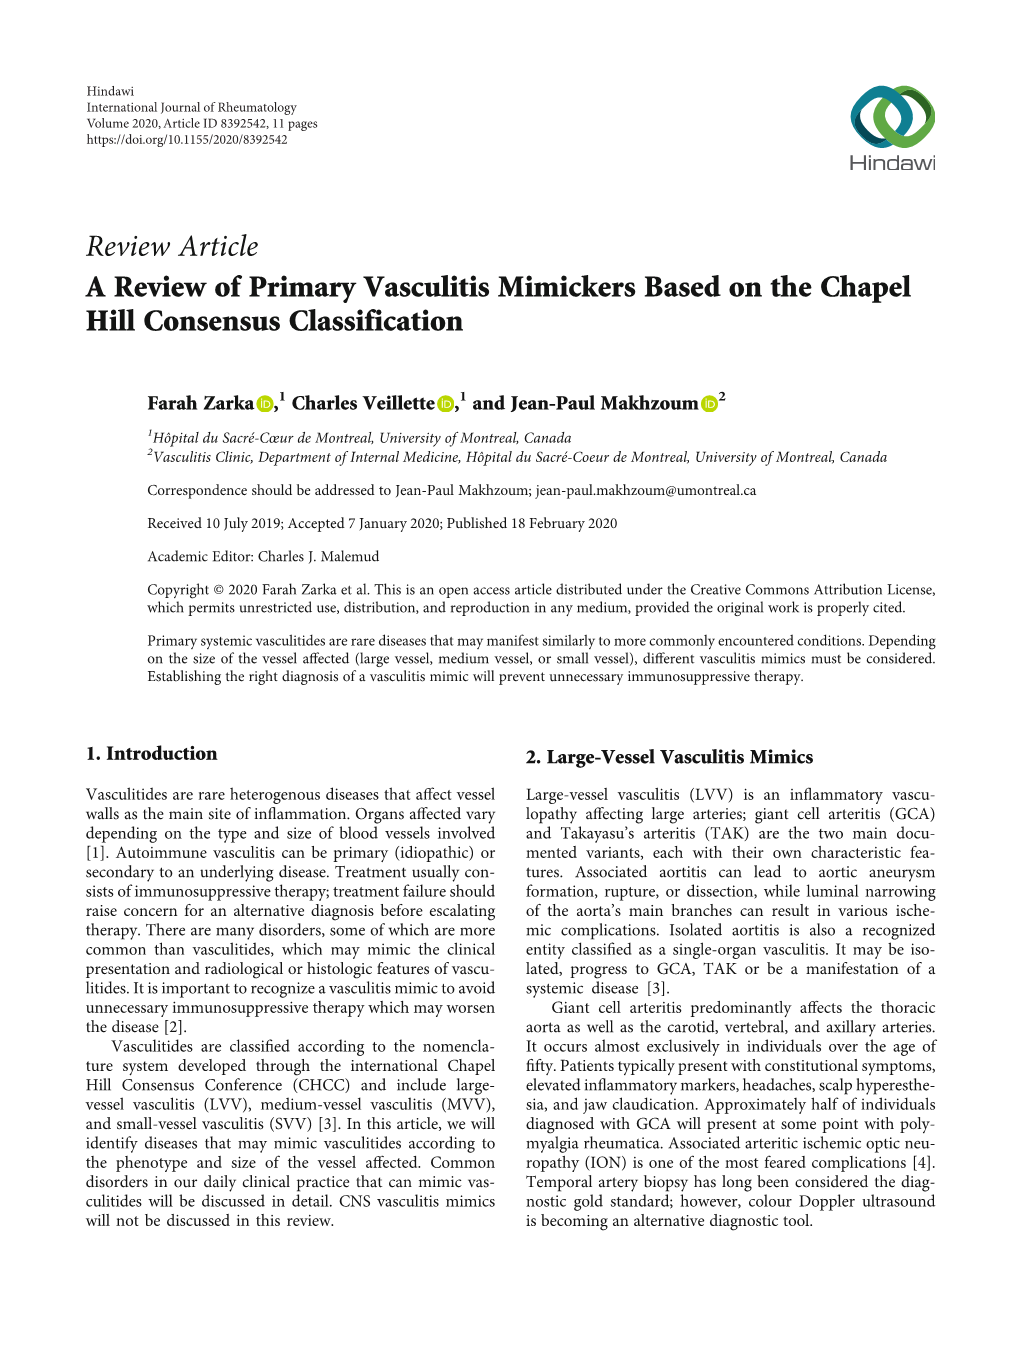 A Review of Primary Vasculitis Mimickers Based on the Chapel Hill Consensus Classification